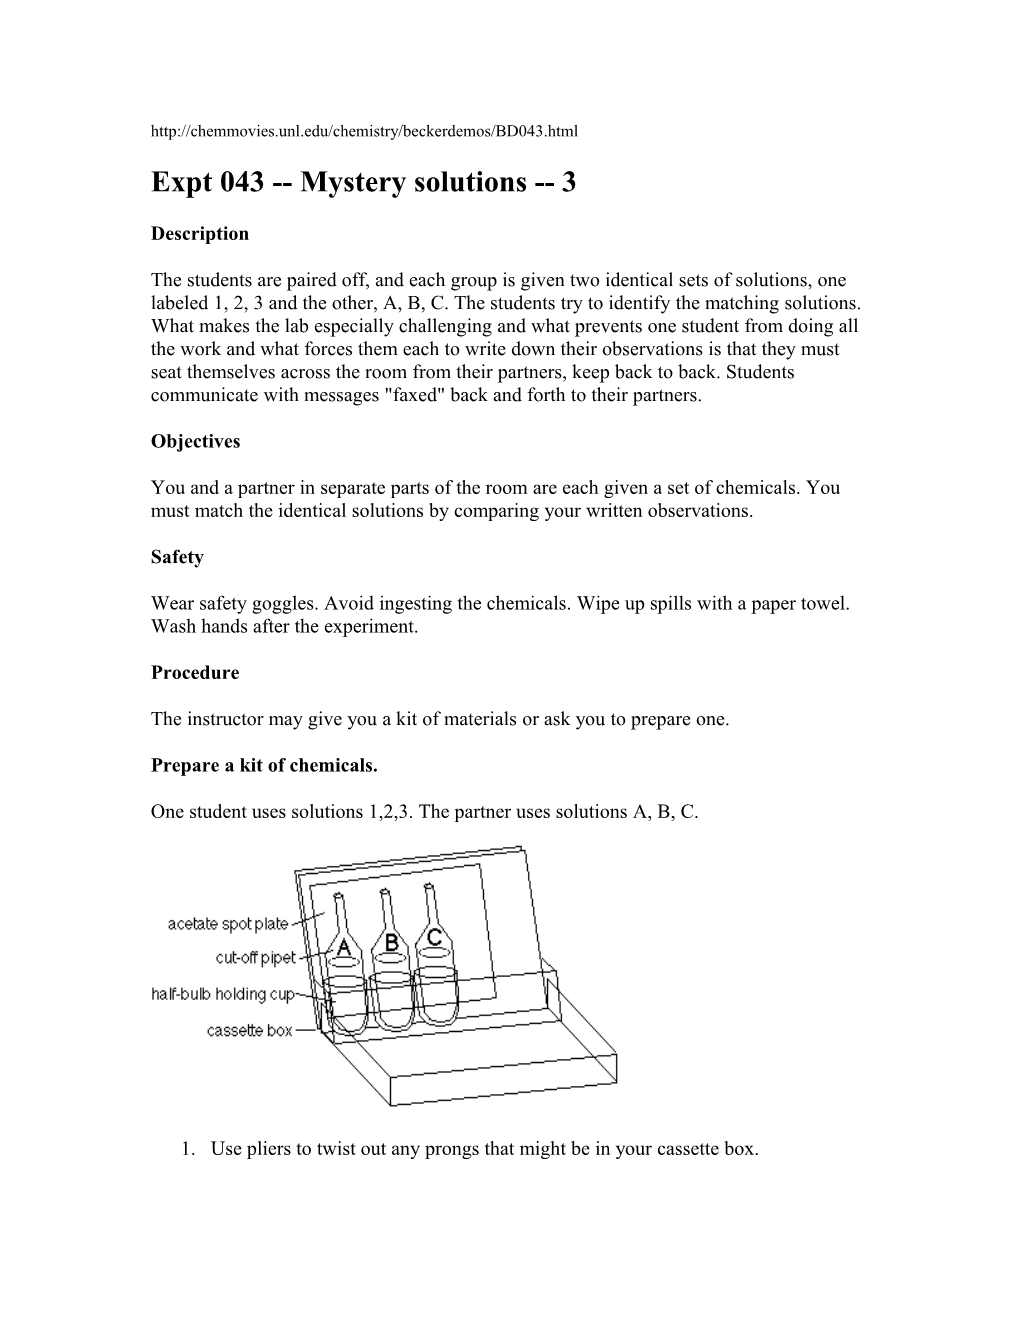 Expt 043 Mystery Solutions 3